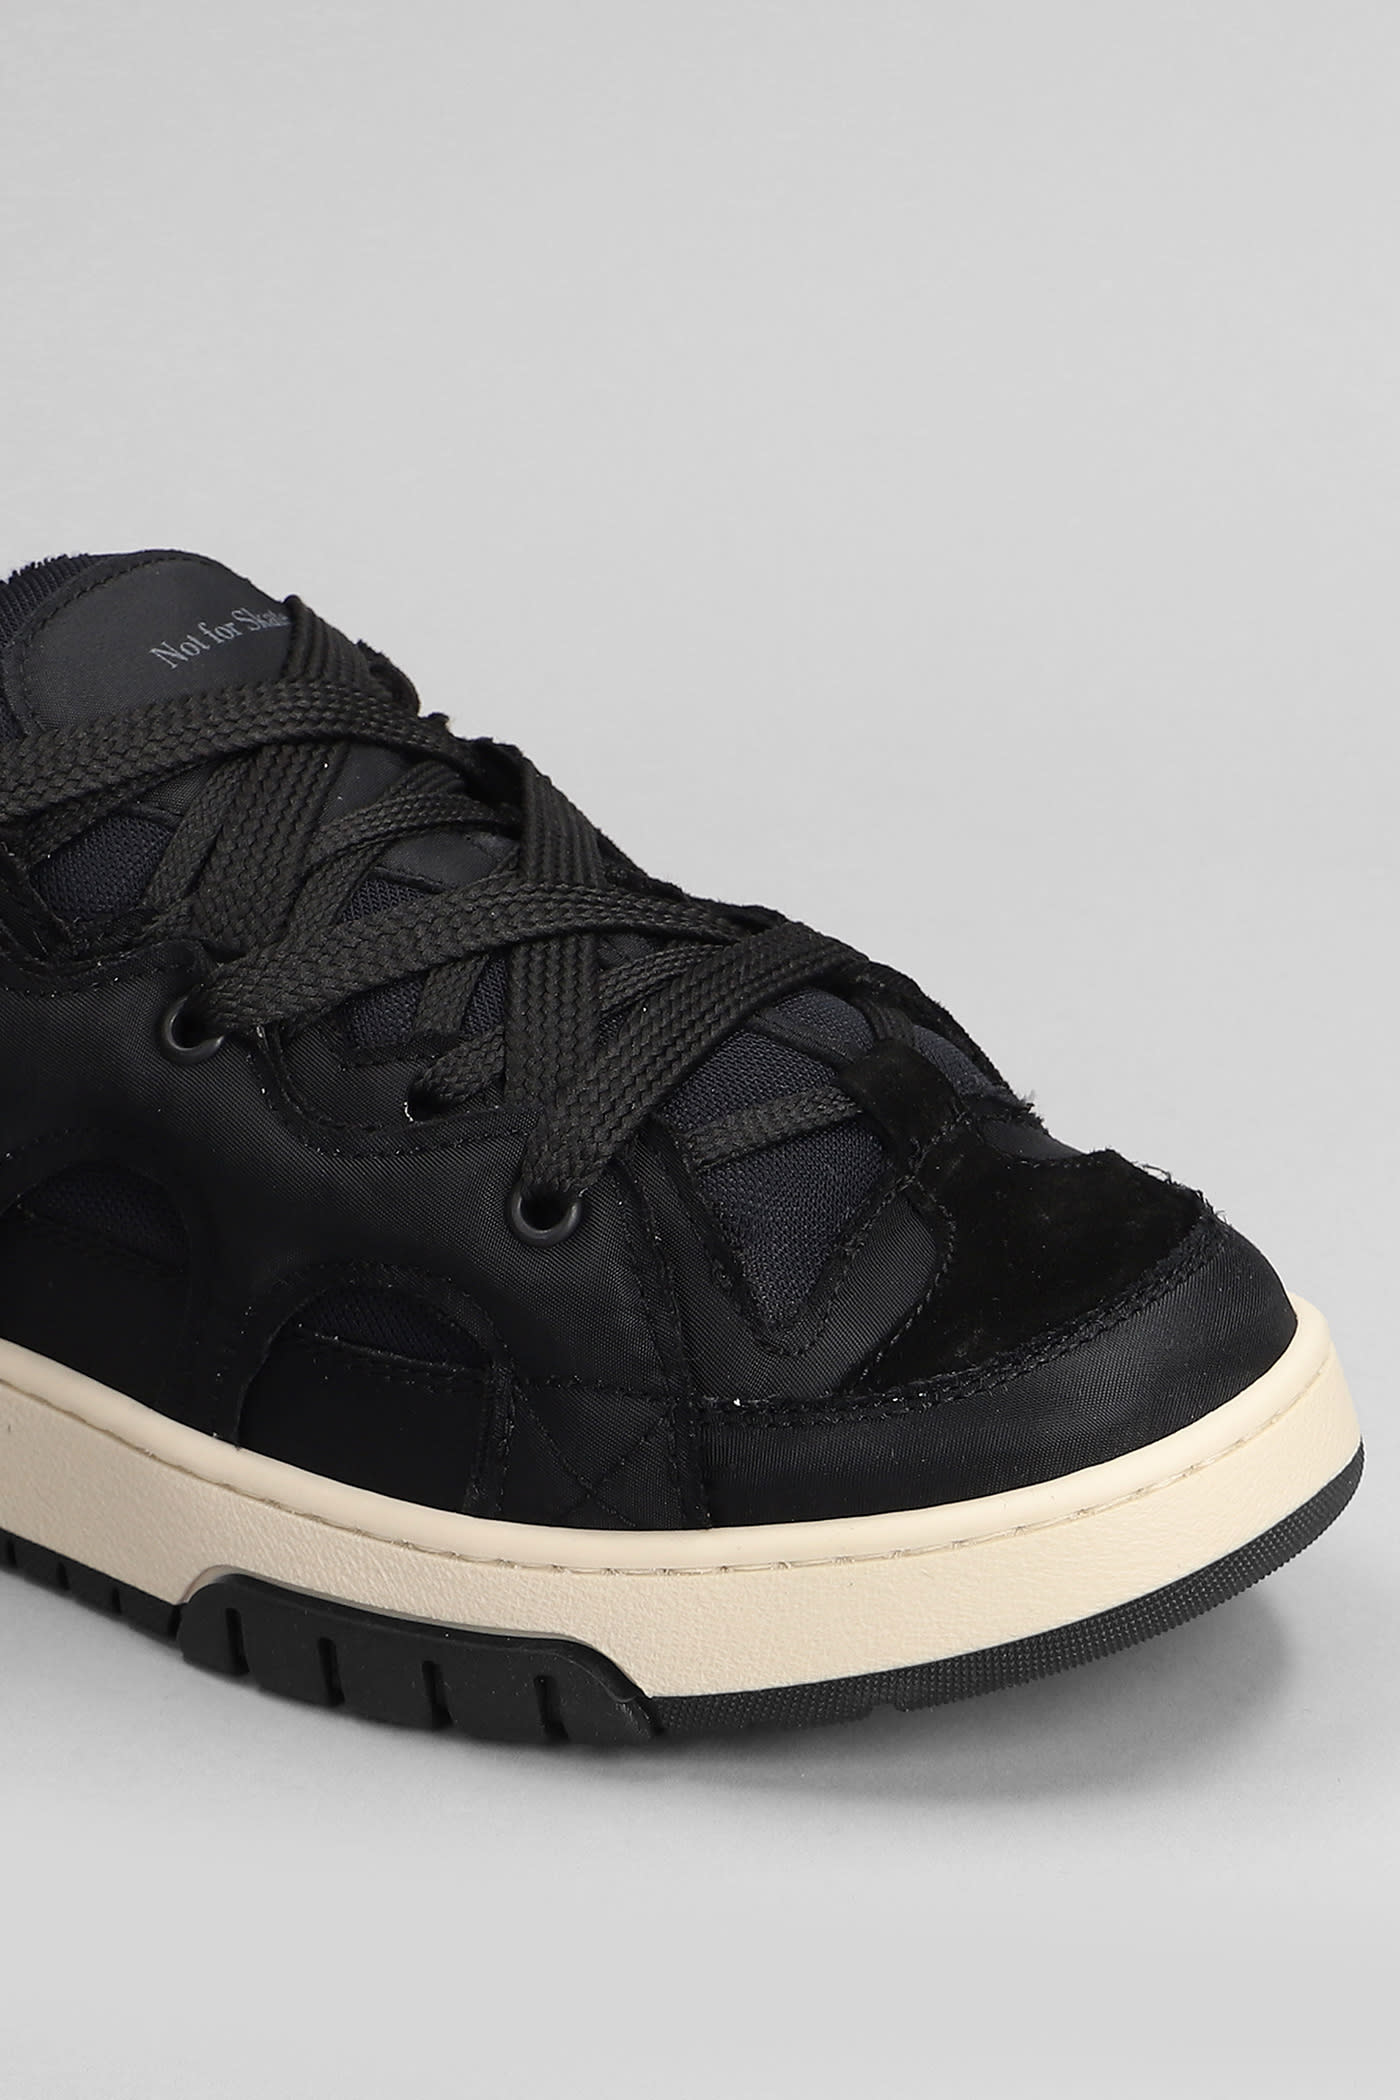 Shop Paura Santha 1 Sneakers In Black Suede And Fabric